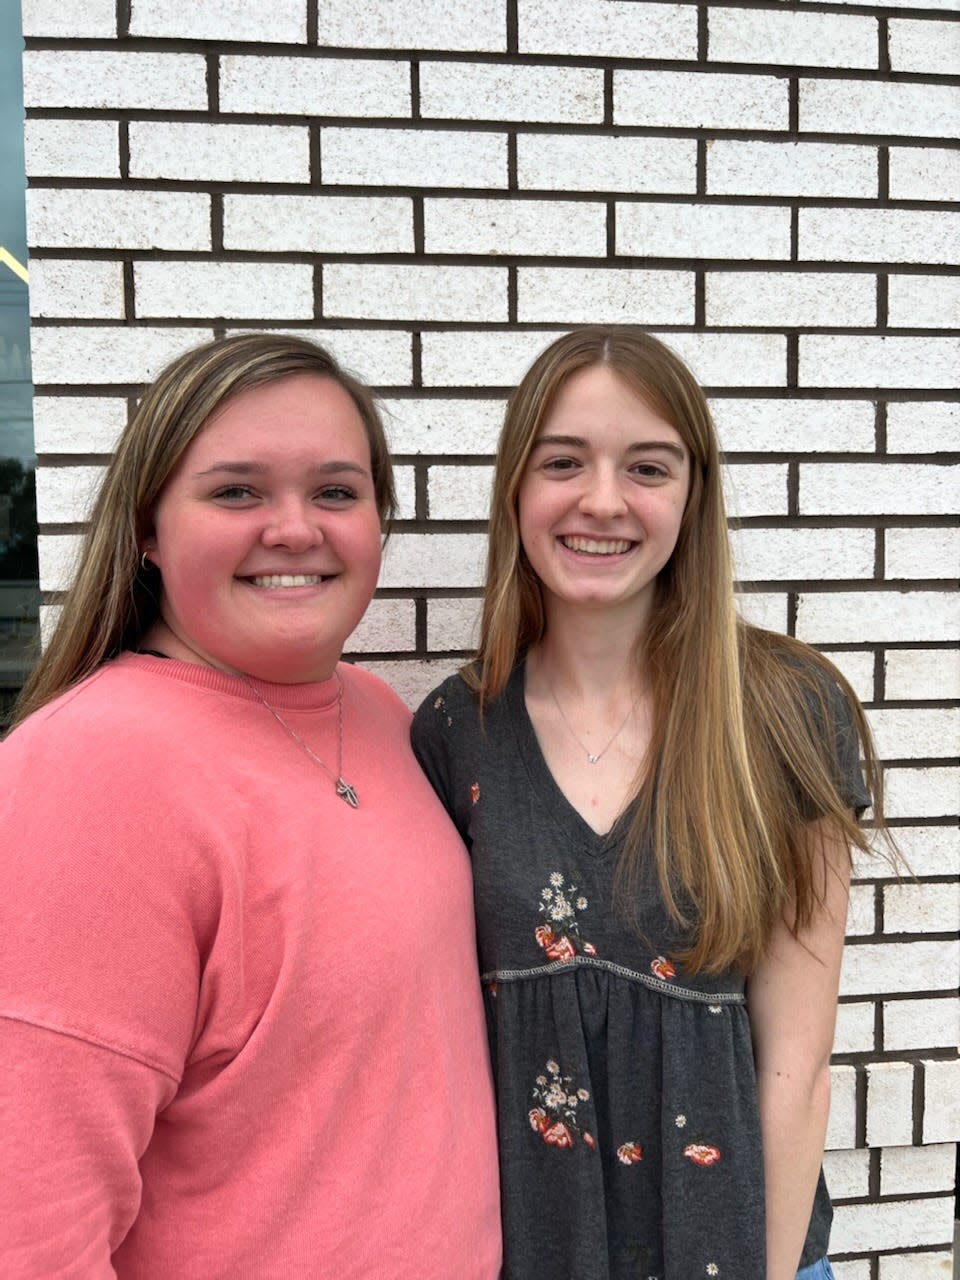 Morgan Brown and Chelsea Tharp took part in Buckeye Girls State 2022 in June 2022 at the University of Mount Union.